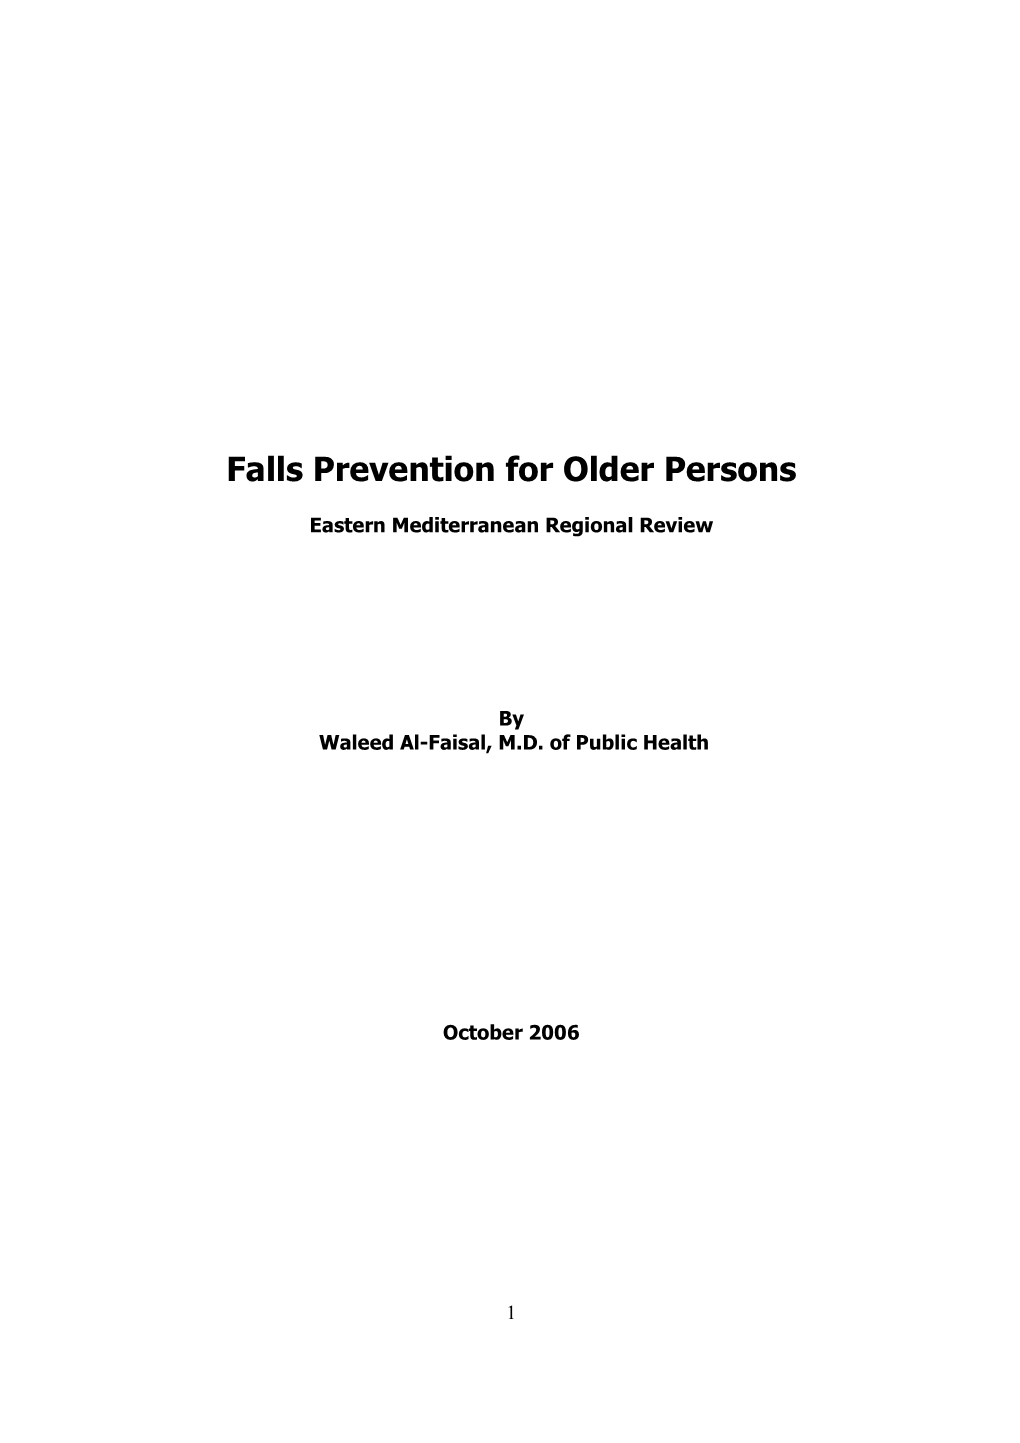 Falls Prevention for Older Persons